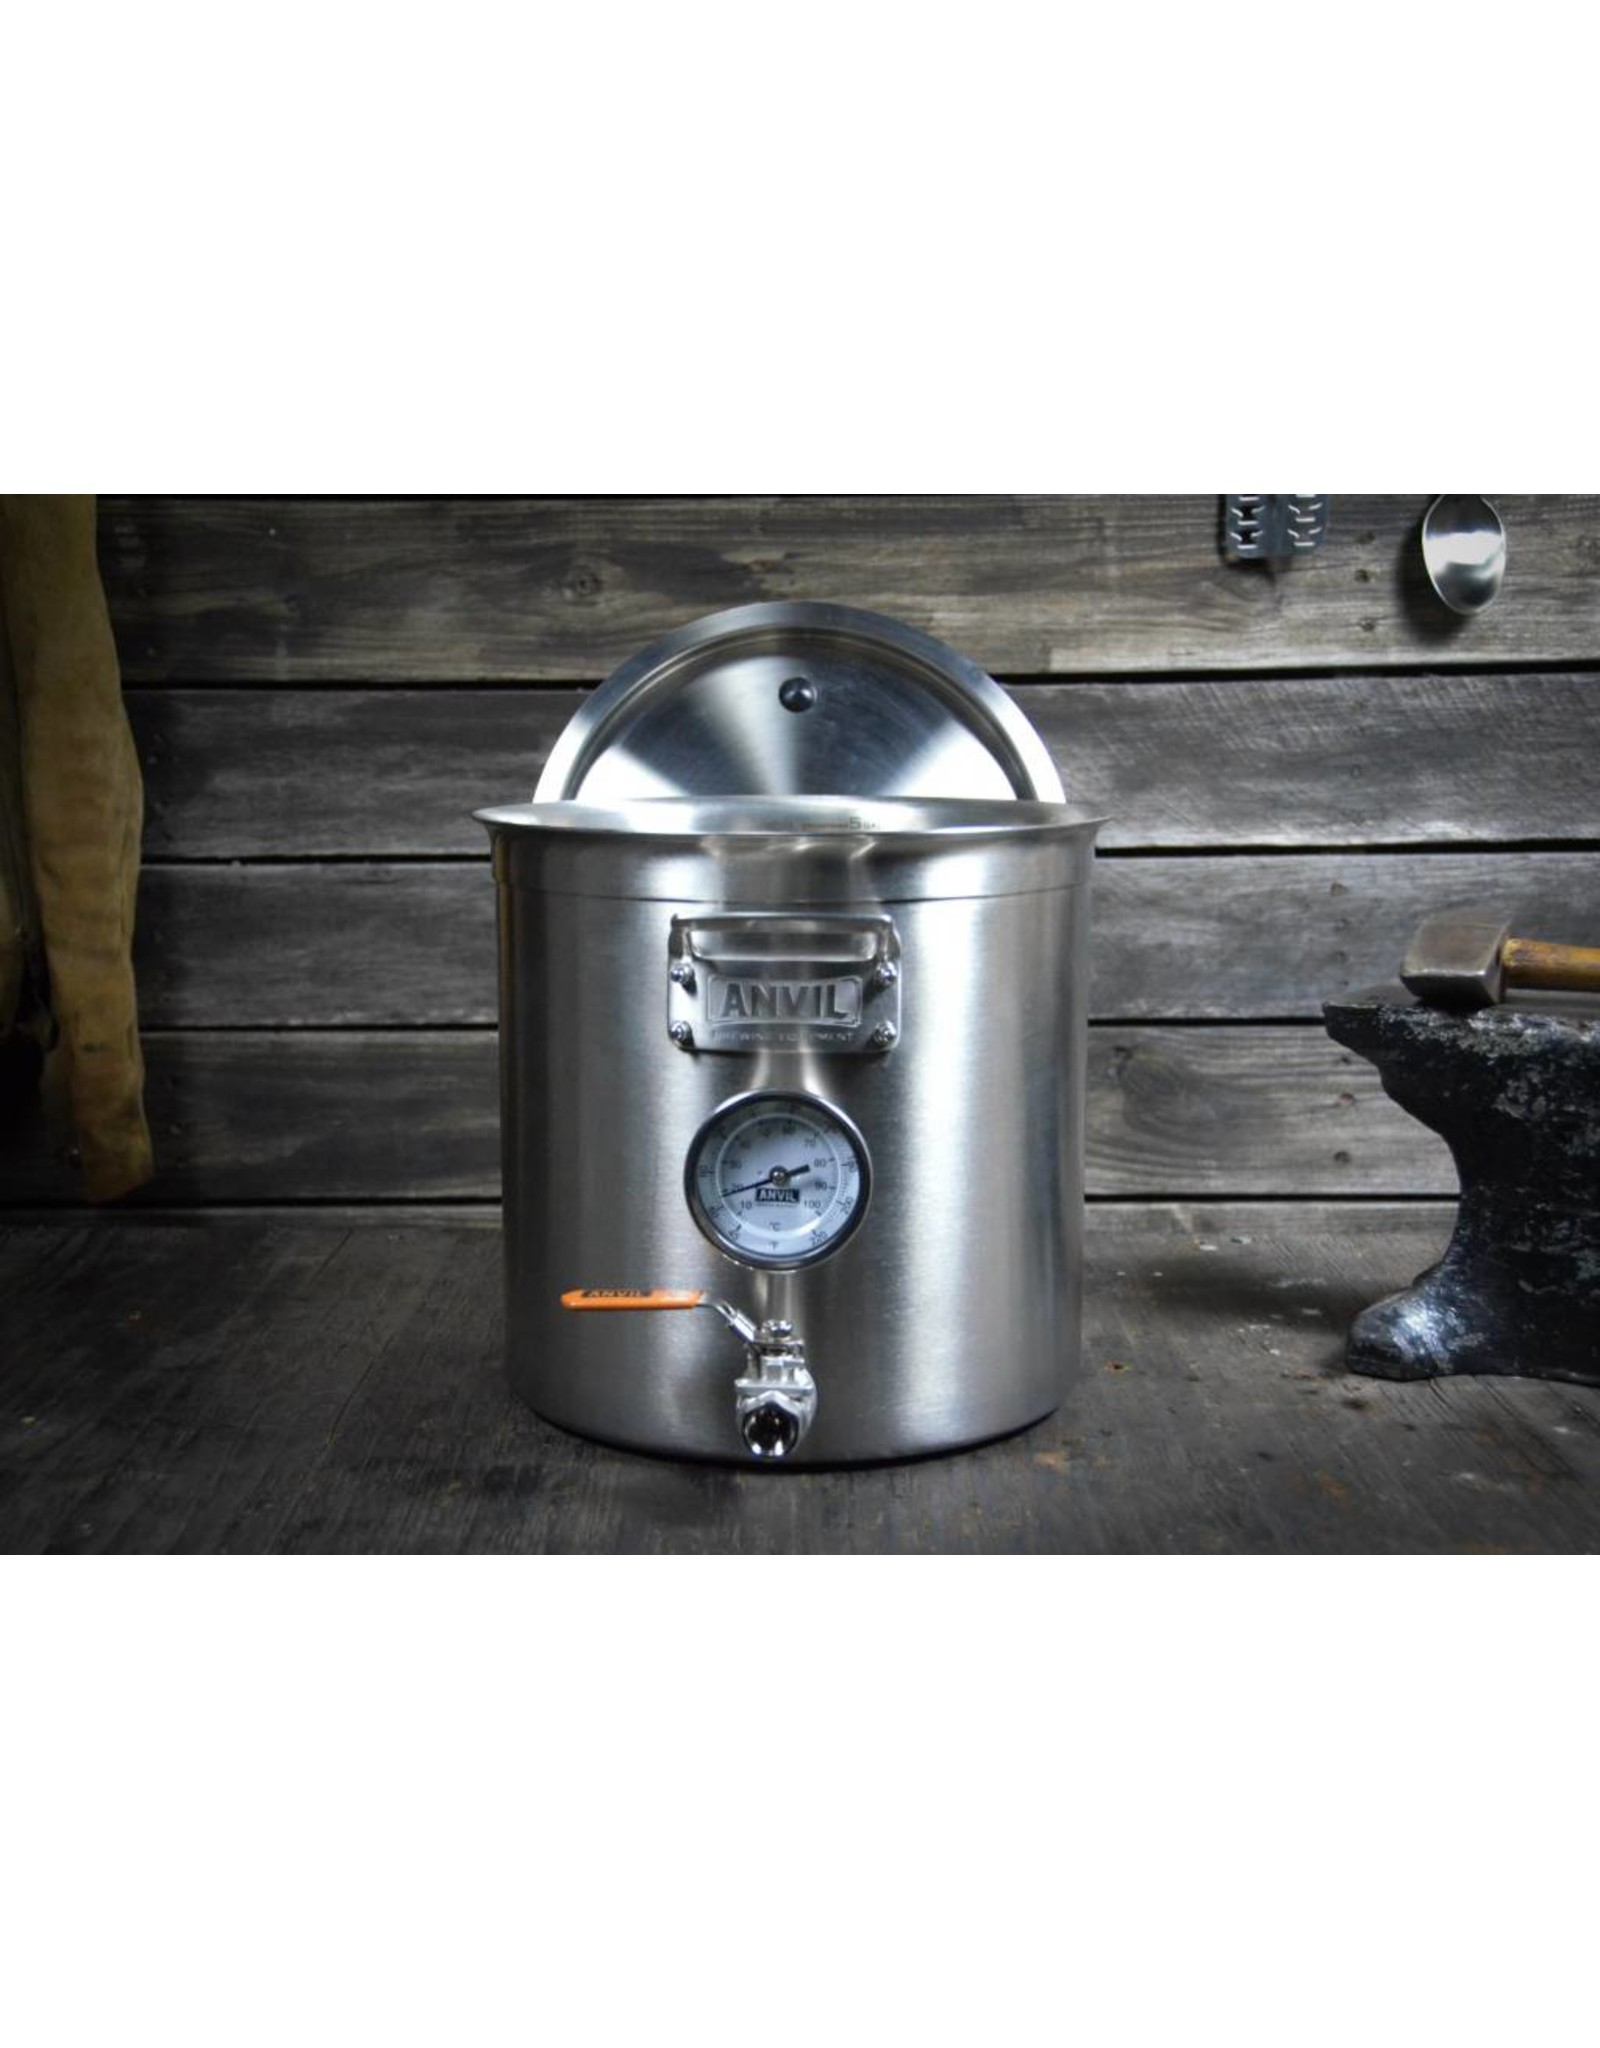 ANVIL BREW KETTLE 5.5 GALLONS